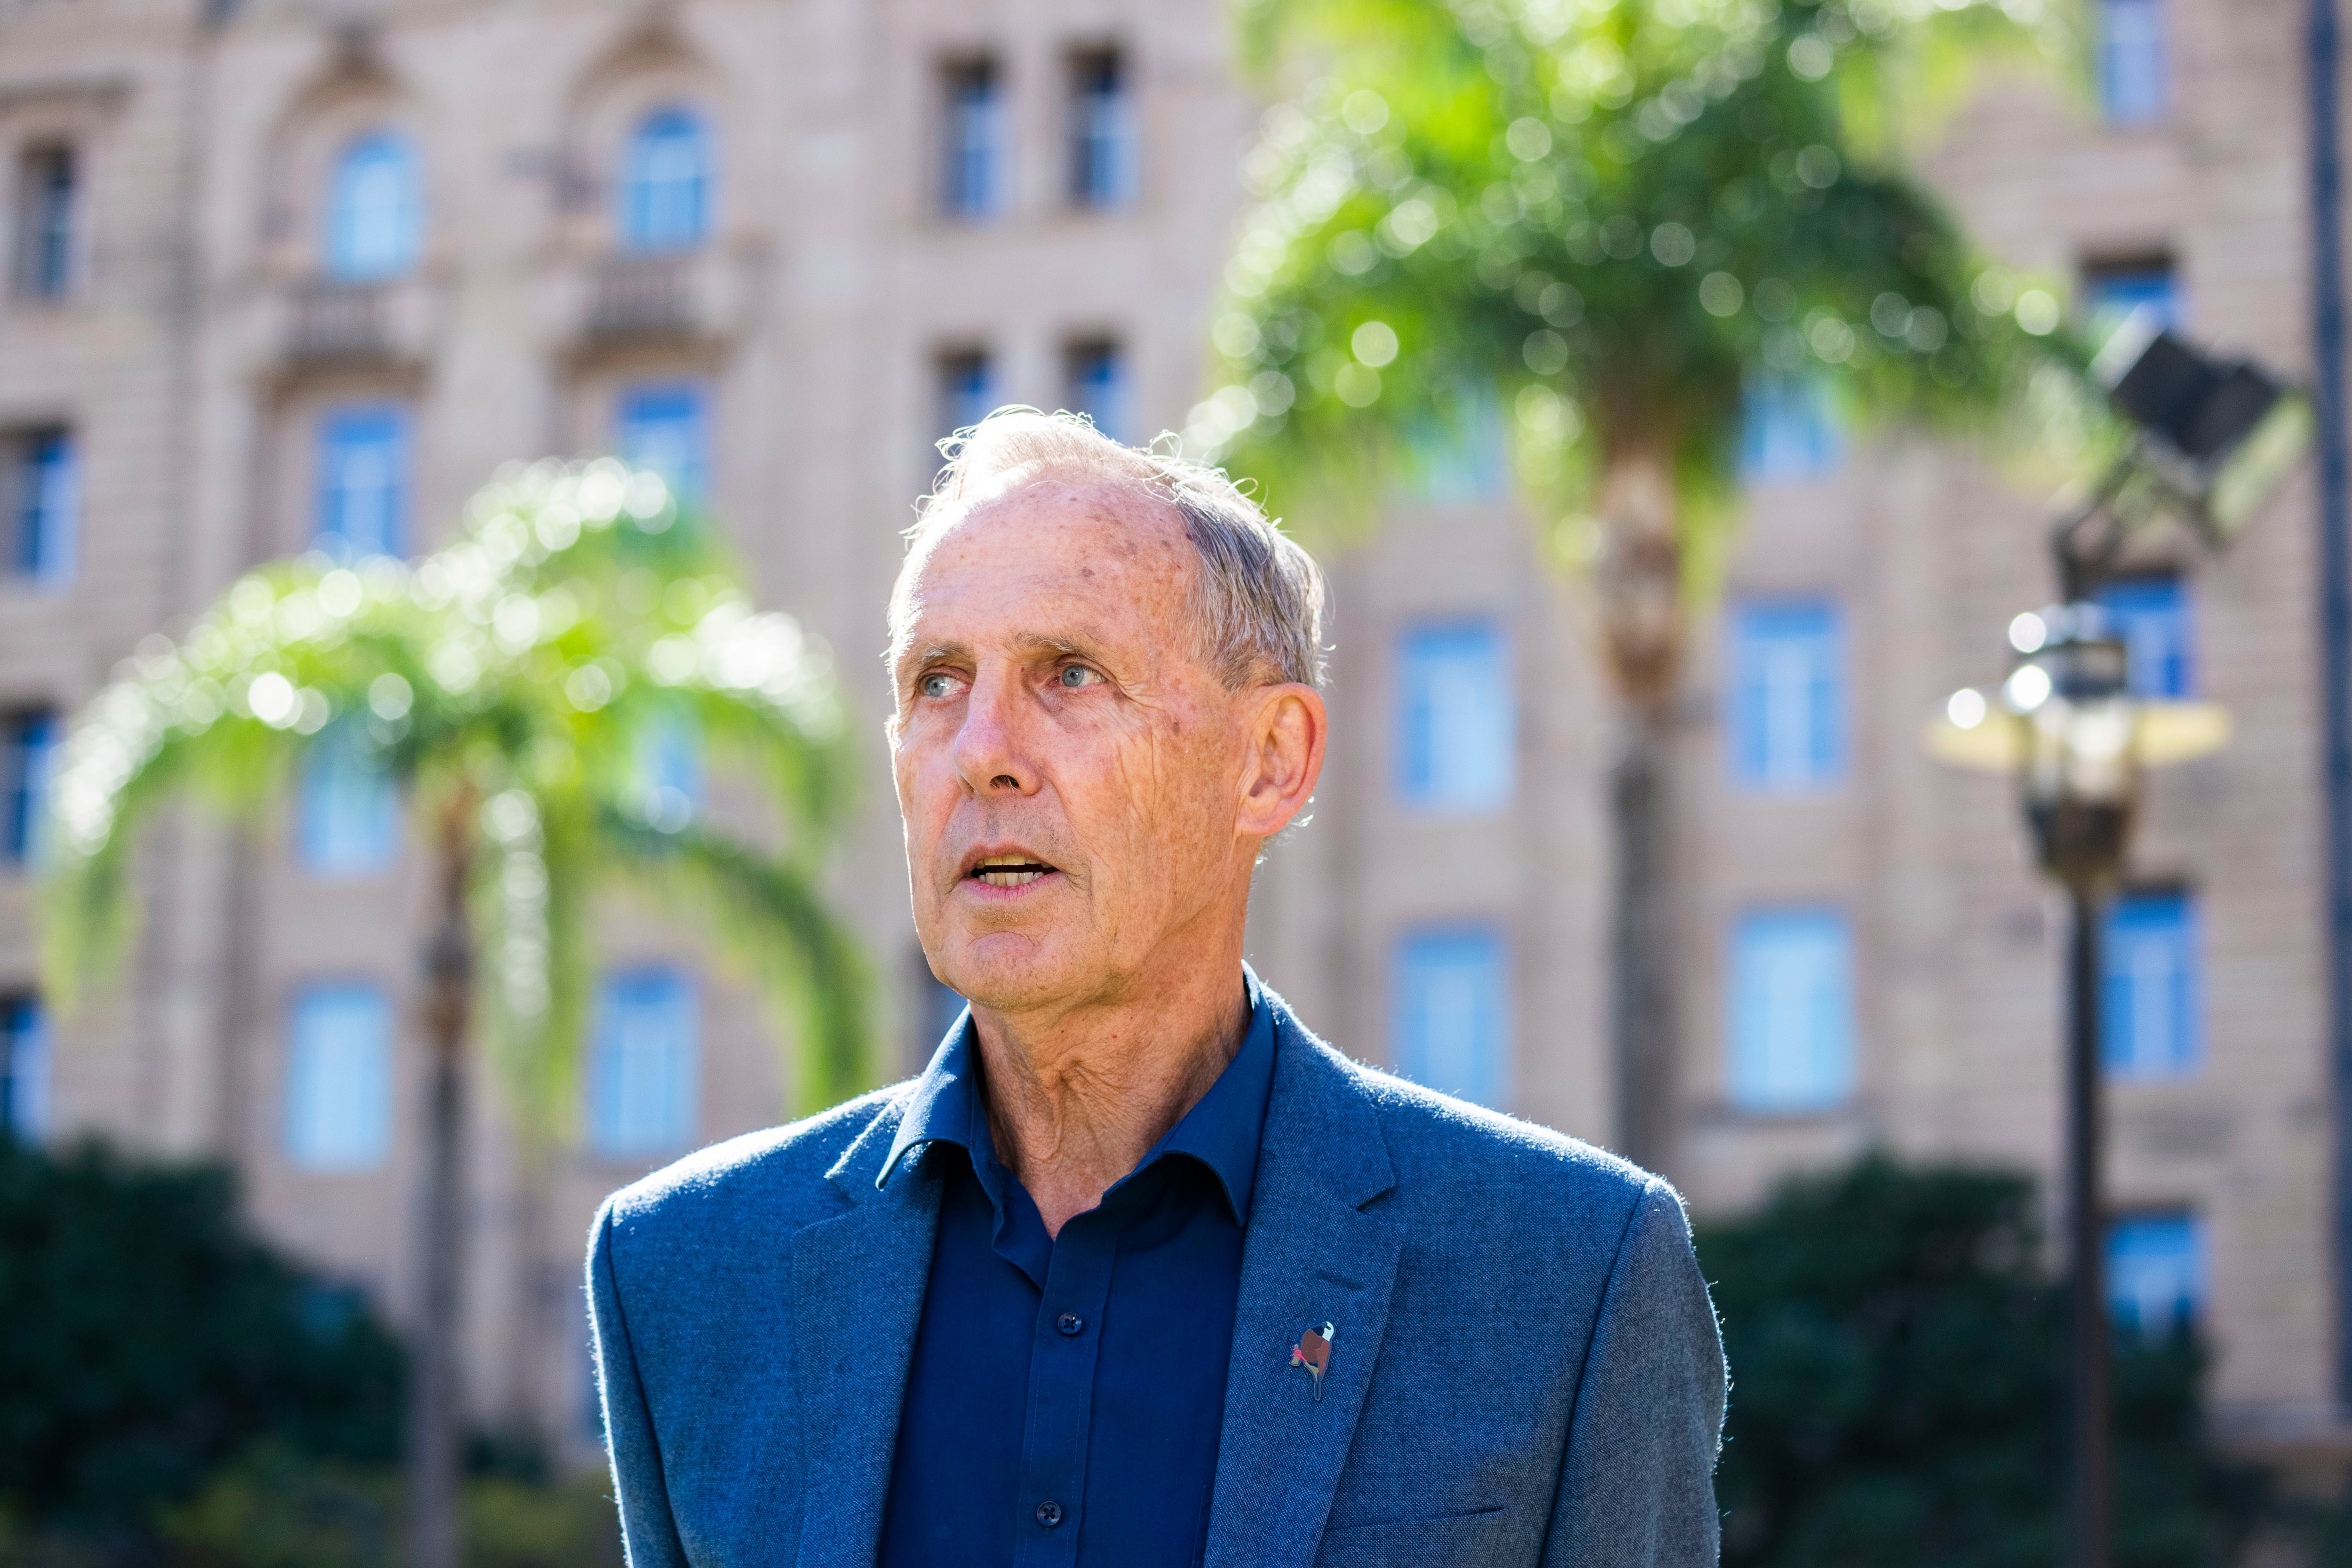 Bob Brown calls for 'moderation' on renewable energy proposals | SBS News